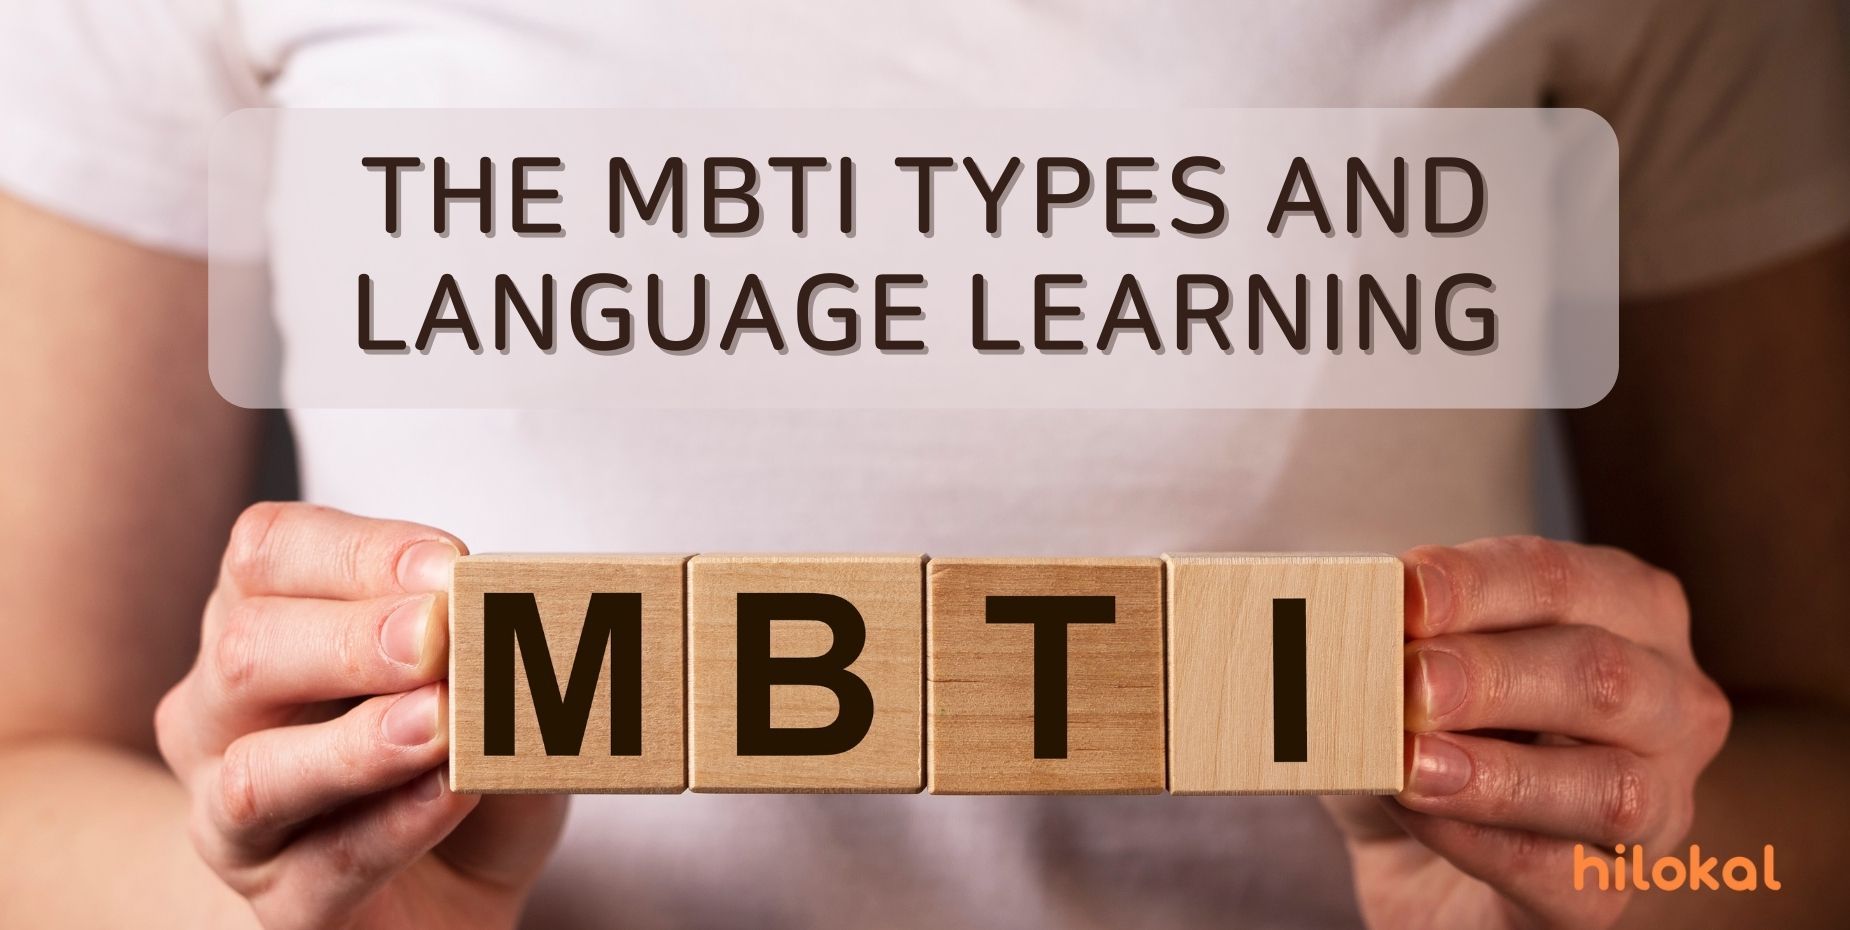 The MBTI Types and Language Learning